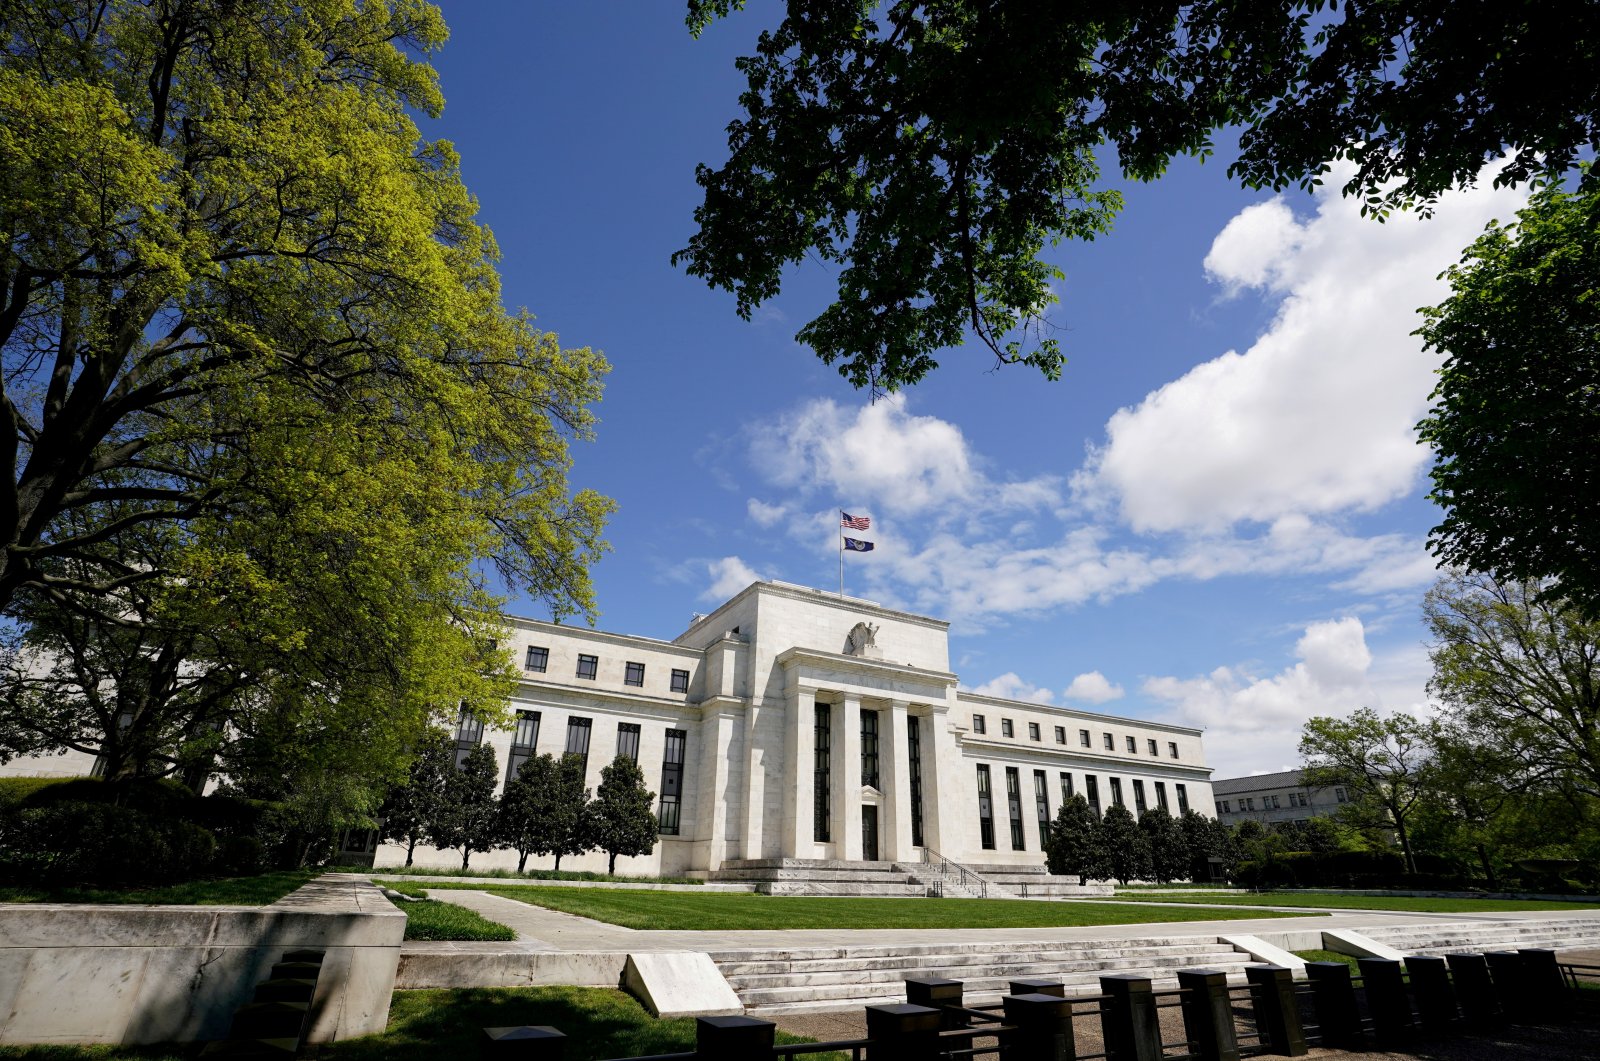 The Federal Reserve building is set against a blue sky in Washington, U.S., May 1, 2020. REUTERS/Kevin Lamarque/File Photo